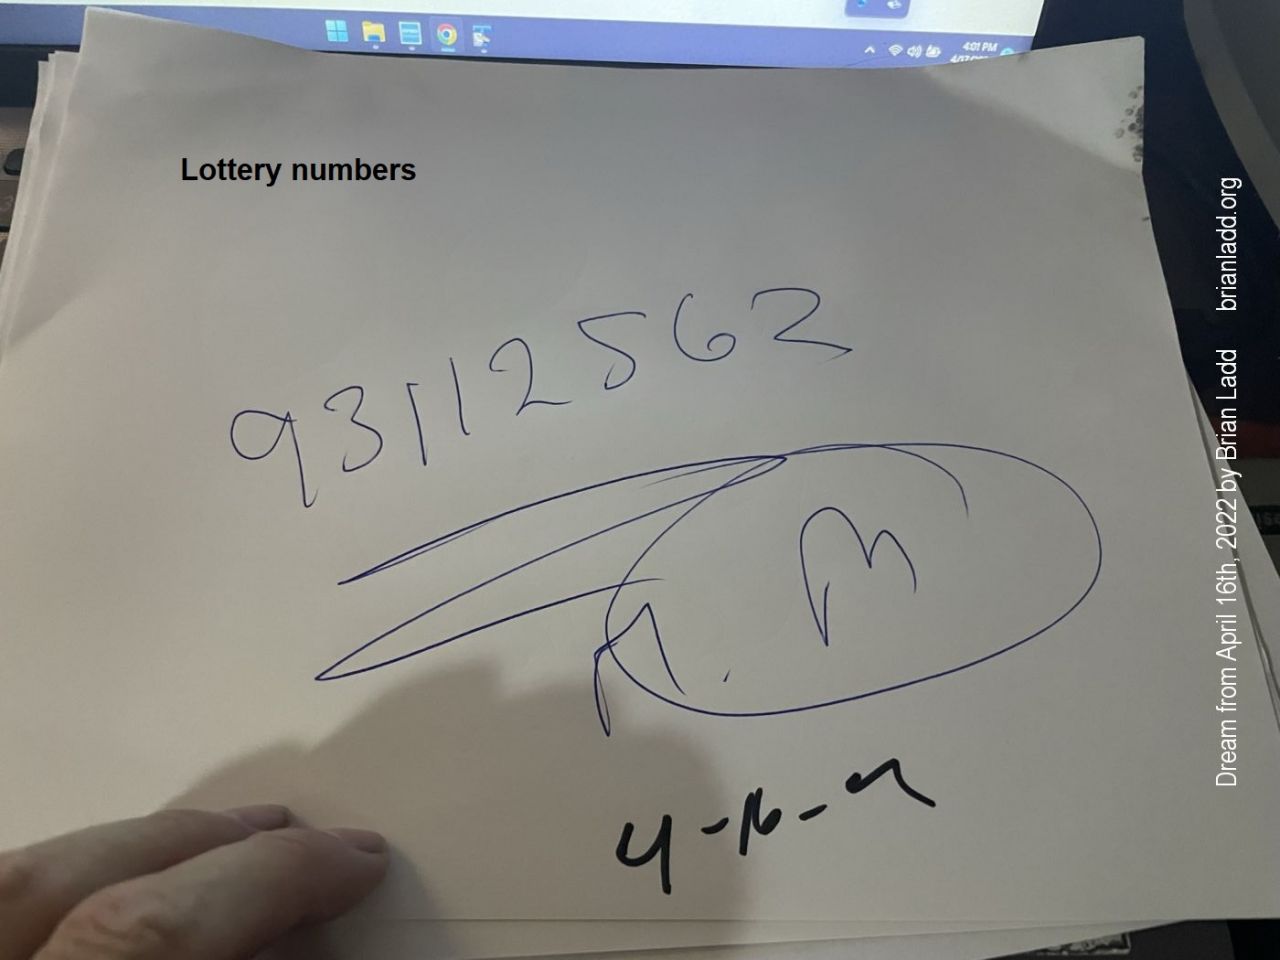 16 April 2022 1  Lottery numbers...
Lottery numbers.

